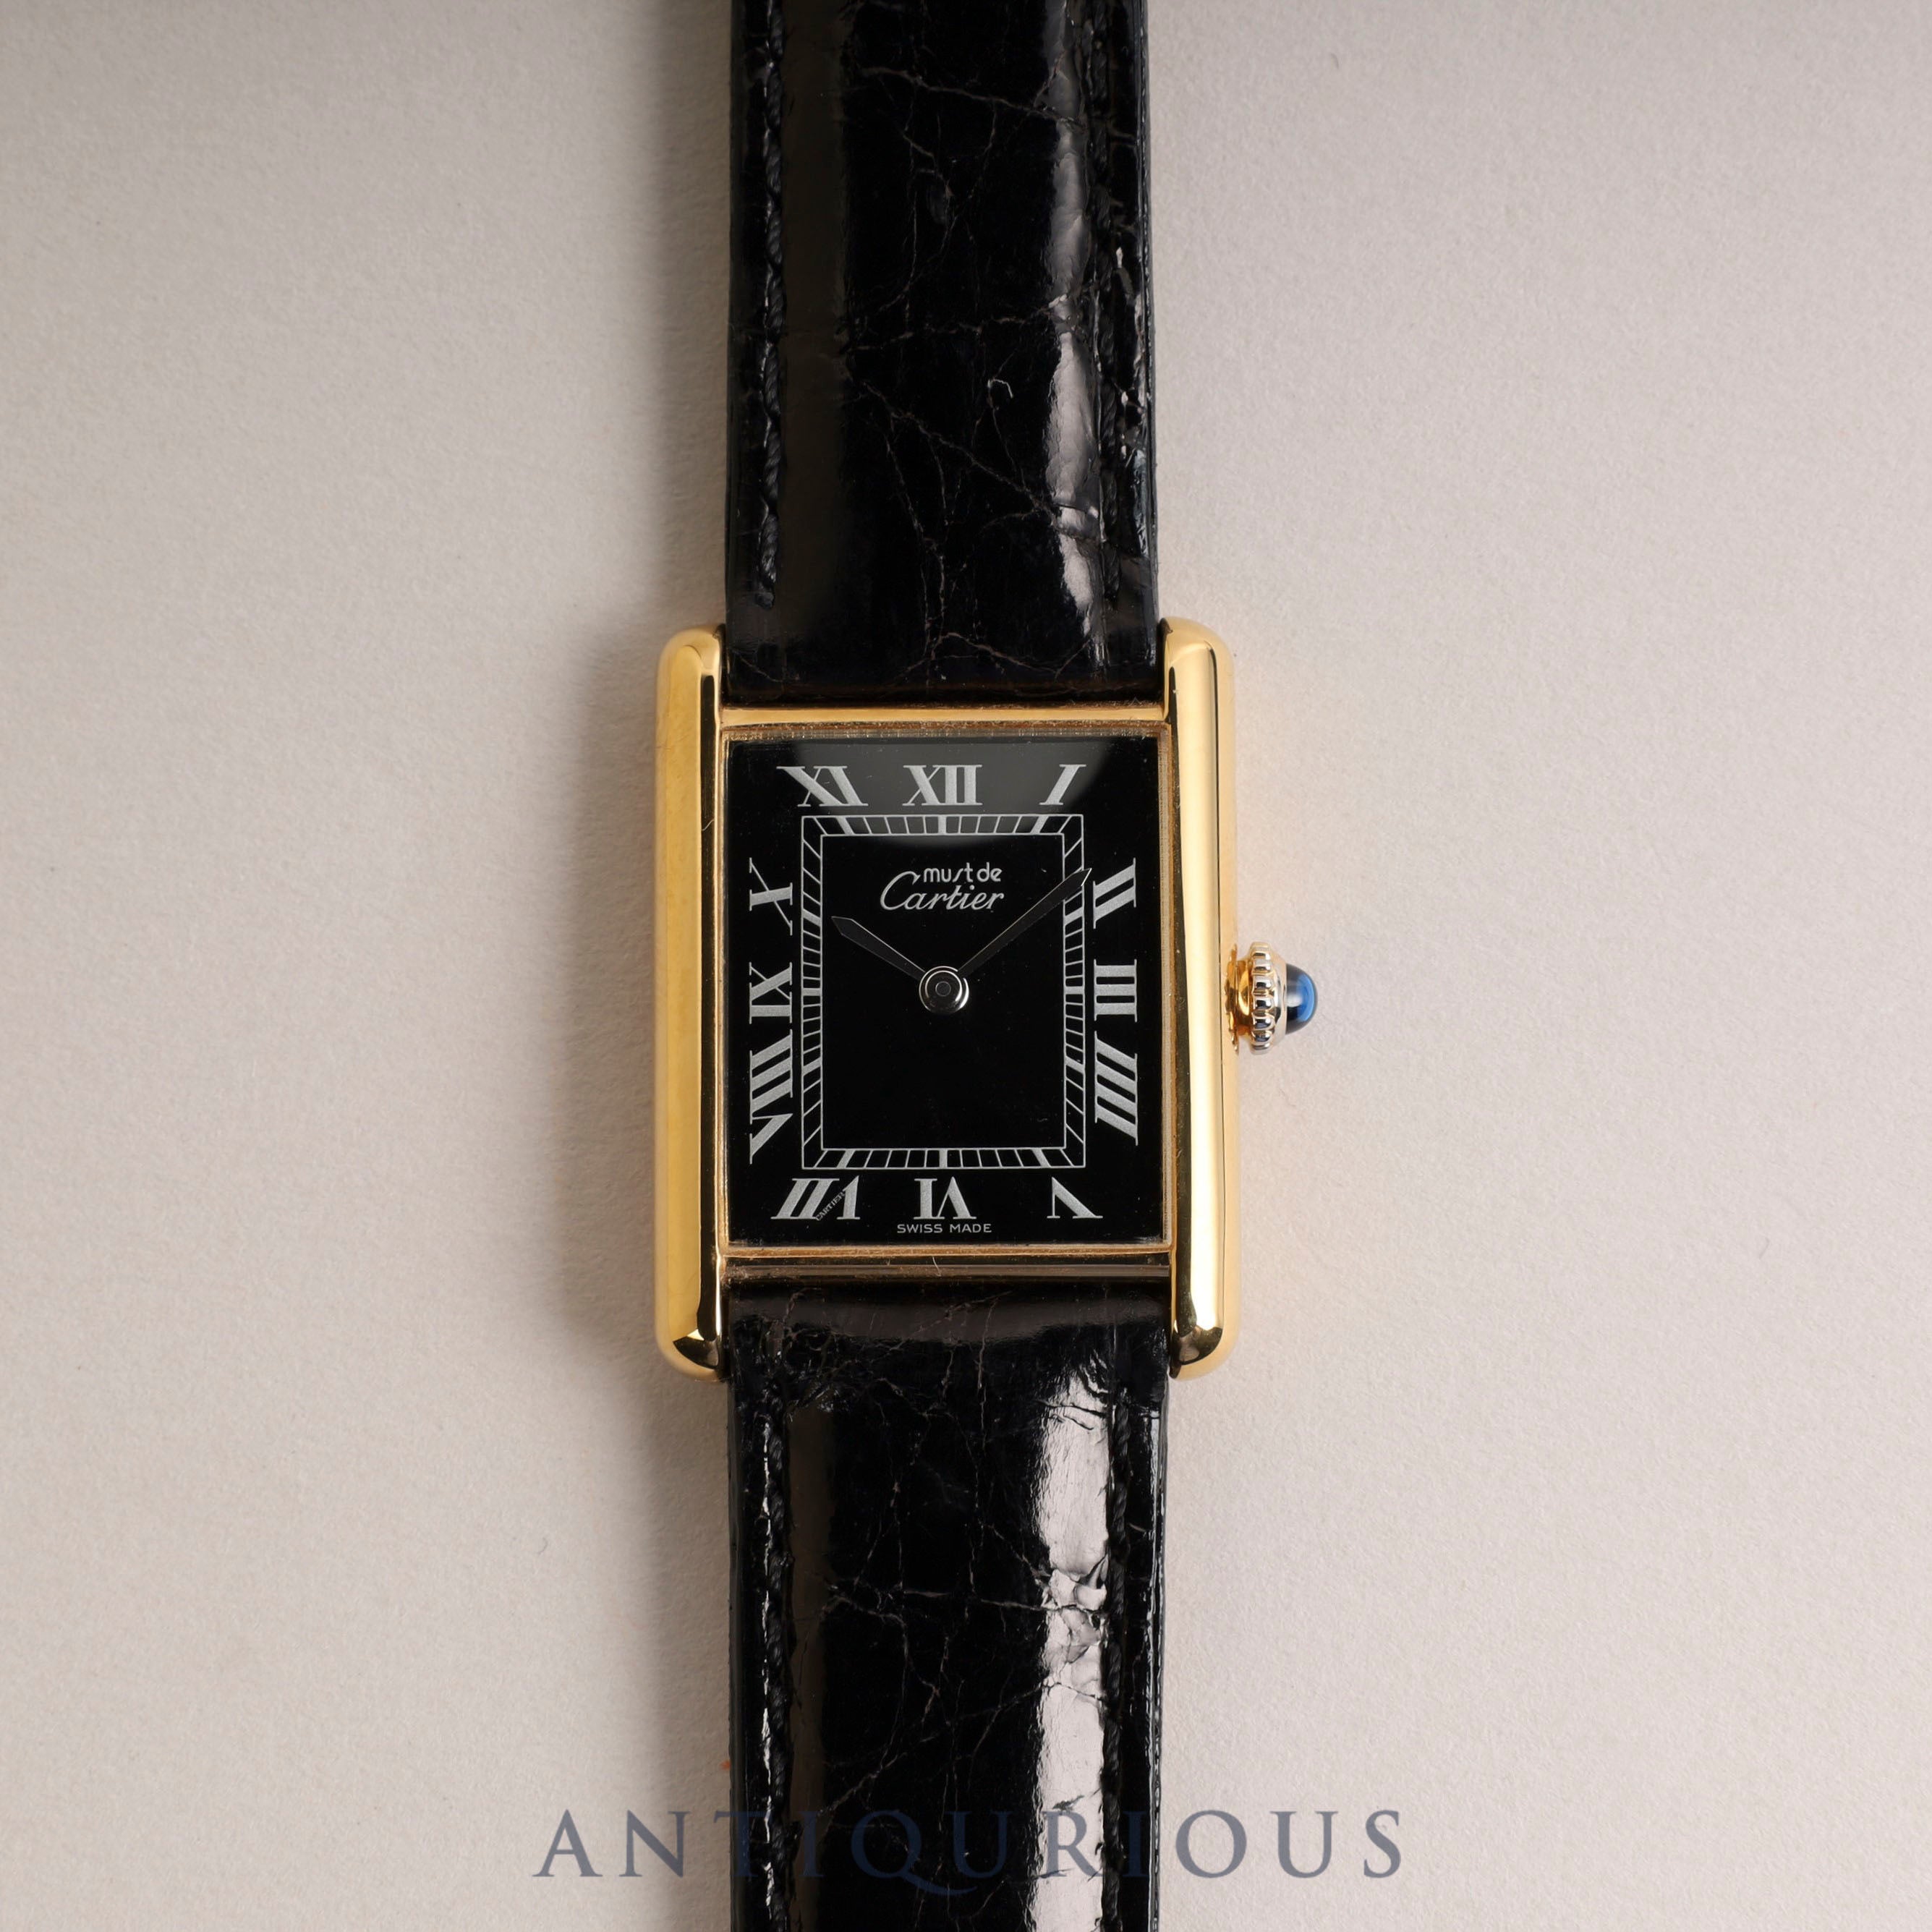 CARTIER Must Tank LM Manual winding Black Roman dial New finish Fully maintained